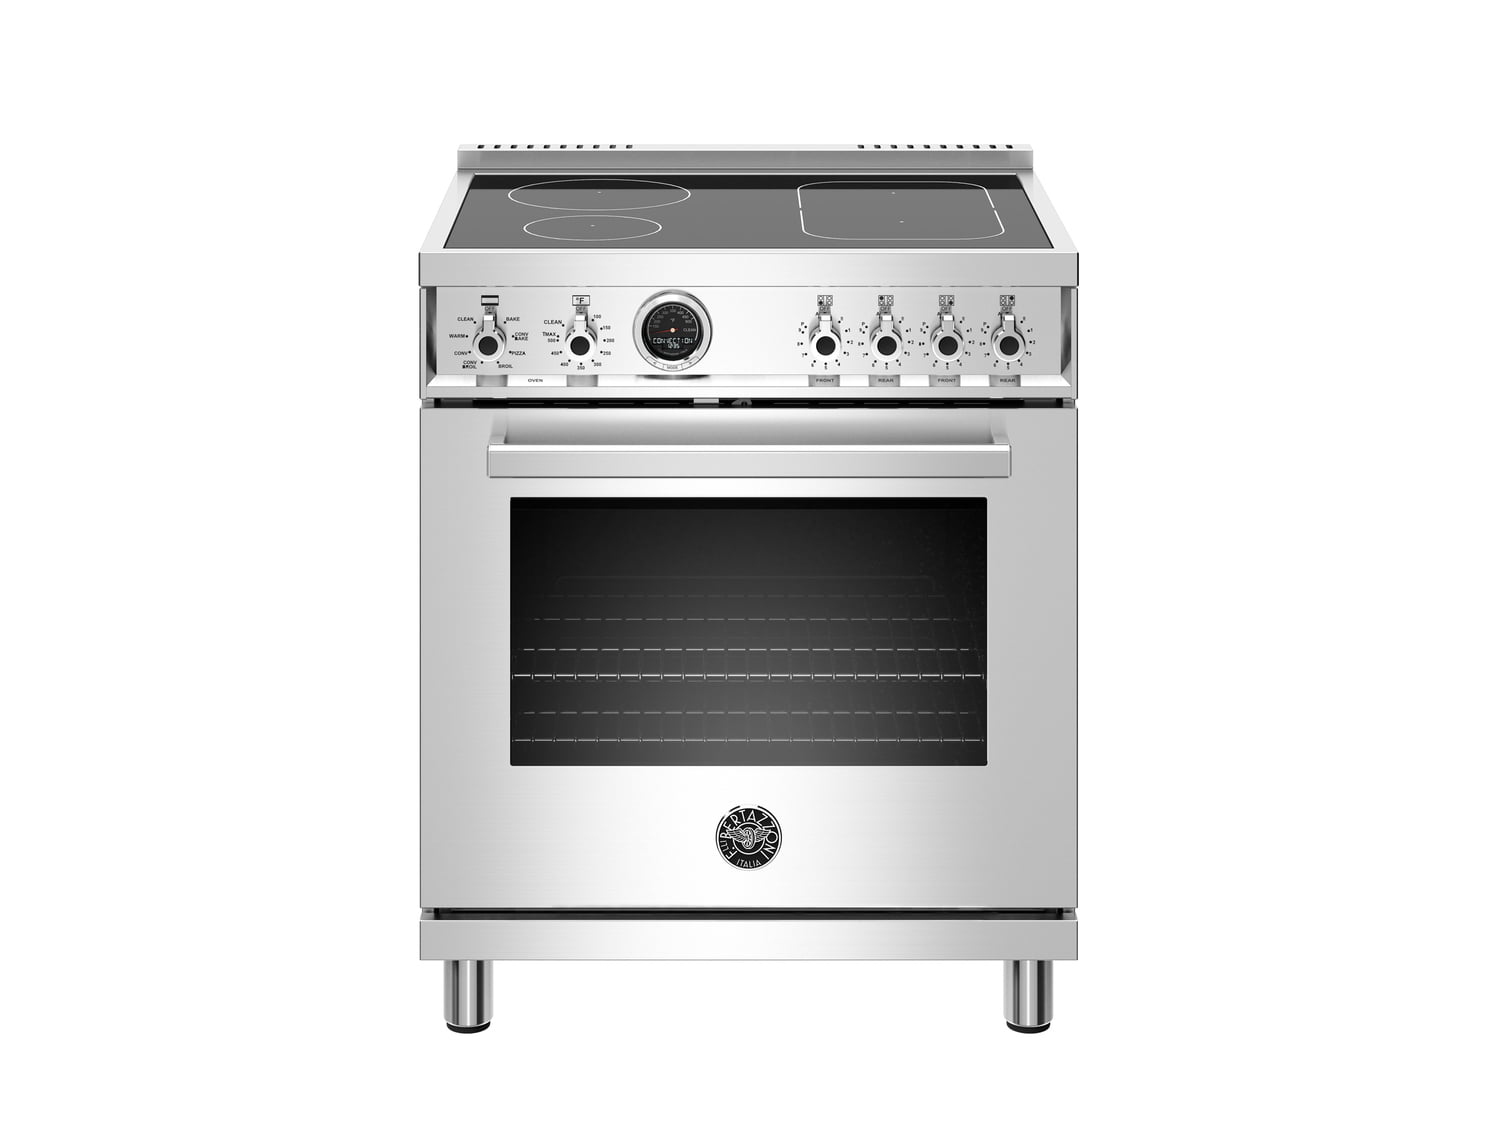 Bertazzoni PROF304INSXT 30 Inch Induction Range, 4 Heating Zones, Electric Self-Clean Oven Stainless Steel